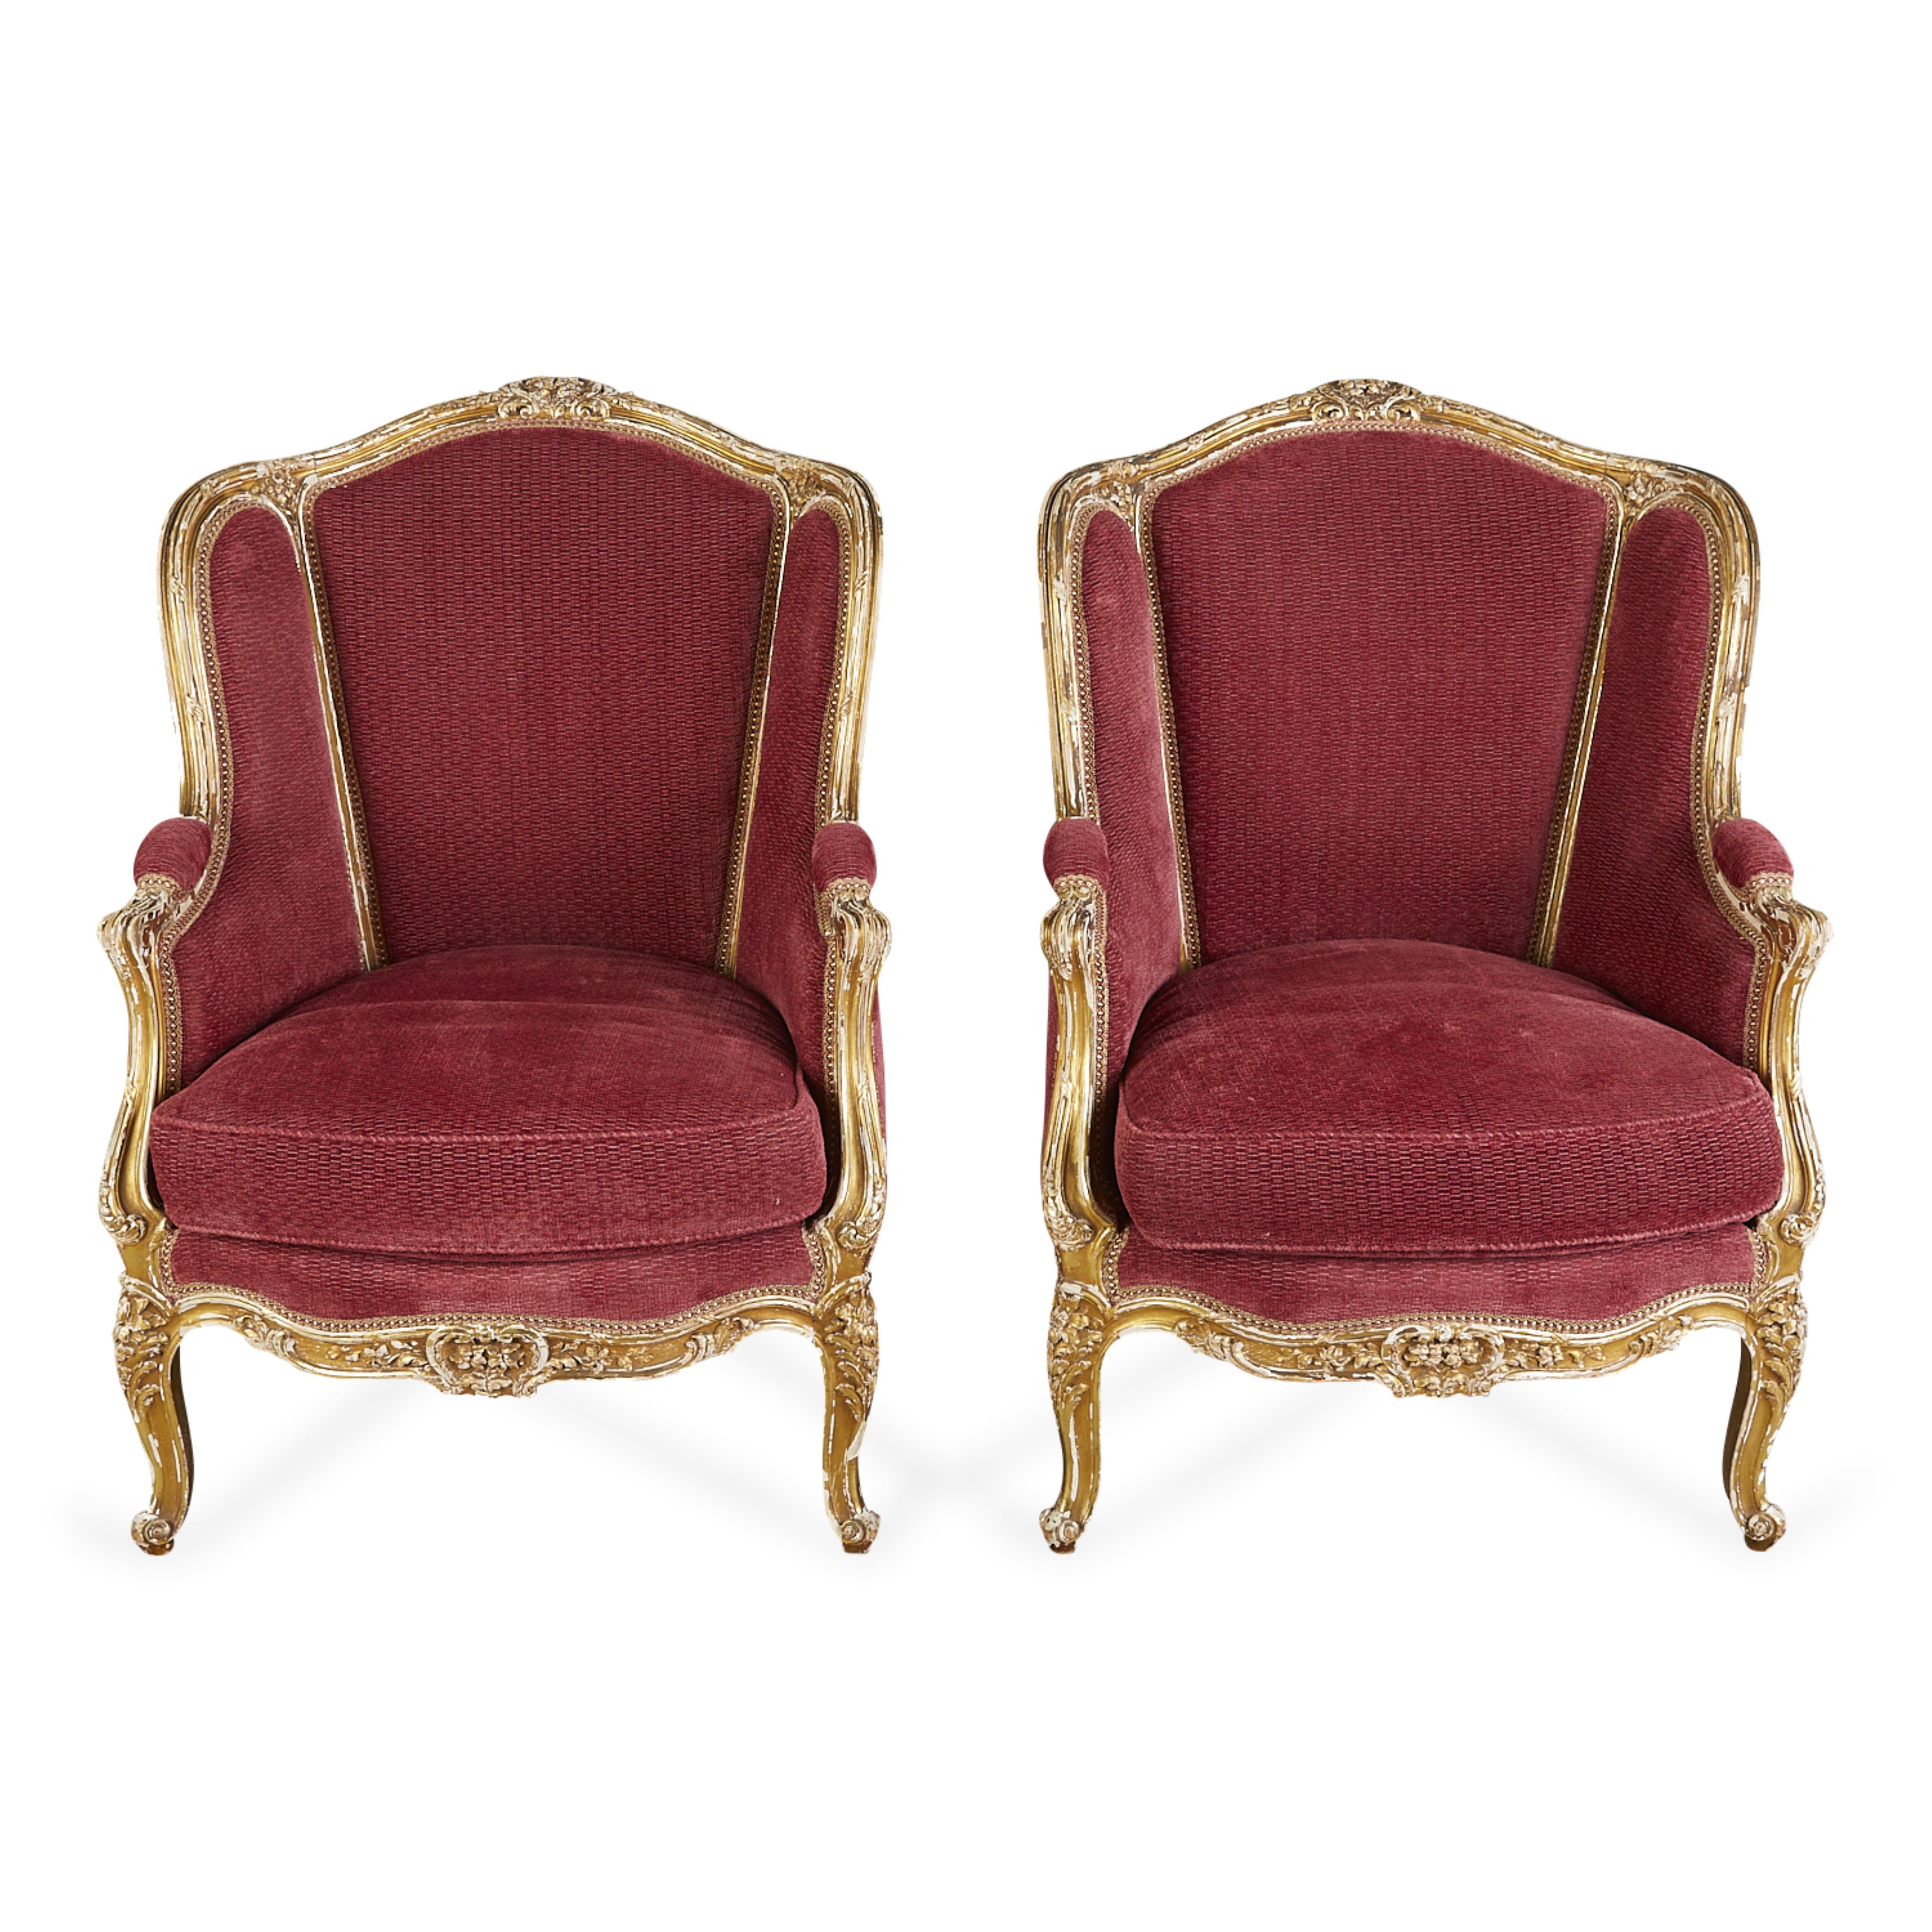 Pair of Louis XV Style Gilt Armchairs - Image 8 of 12